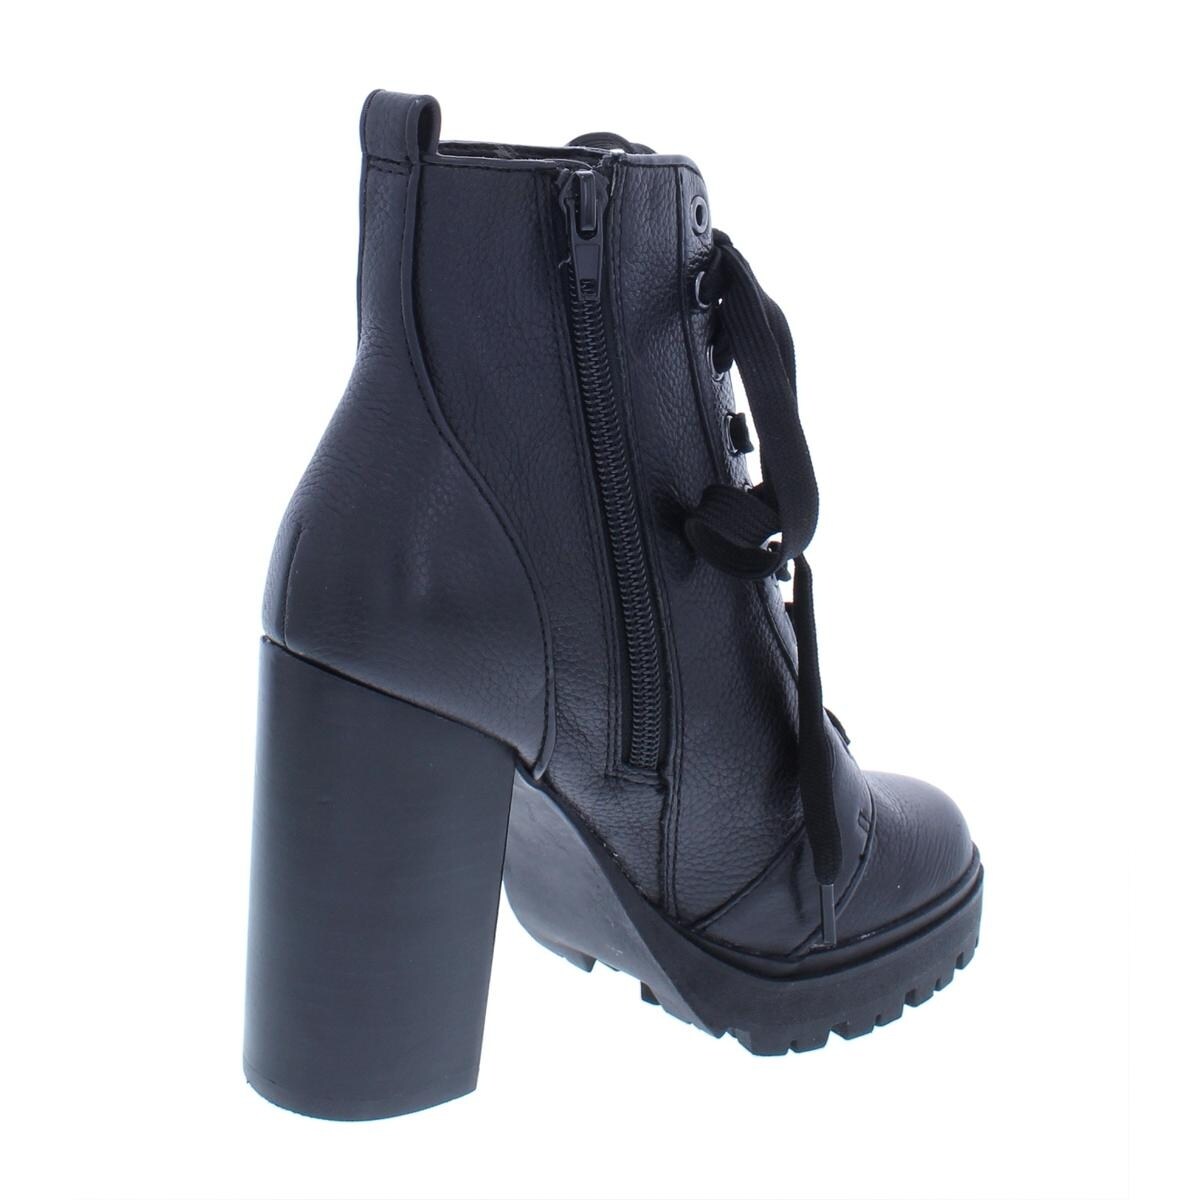 steve madden laurie combat boot